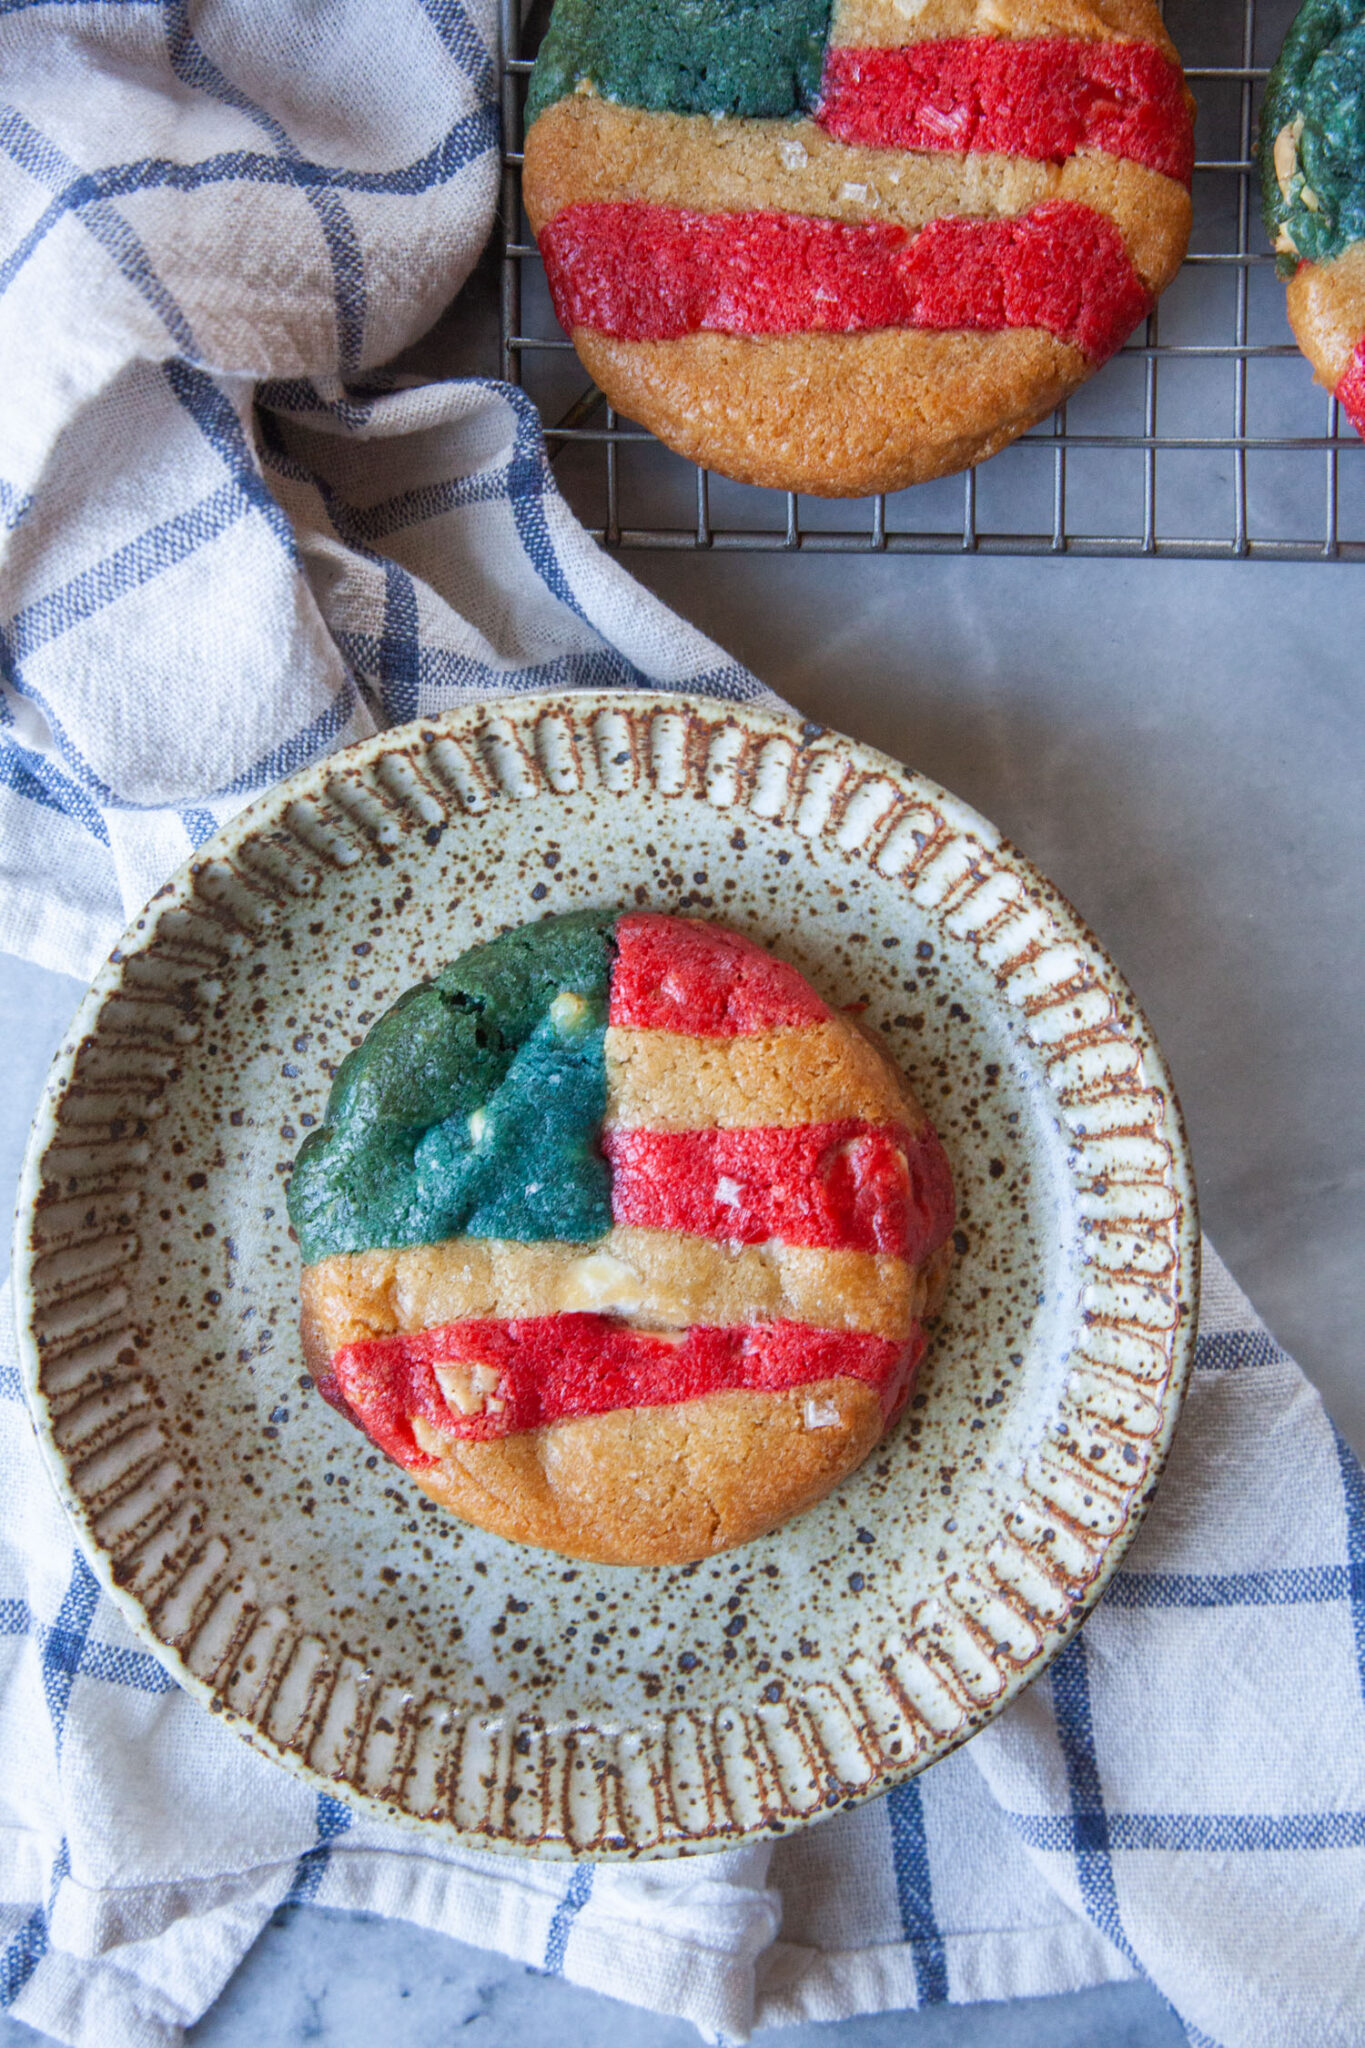 A red, white, and blue, American flag-inspired cookie sitting on a plate, with more cookies on a wire cooling rack next to it.